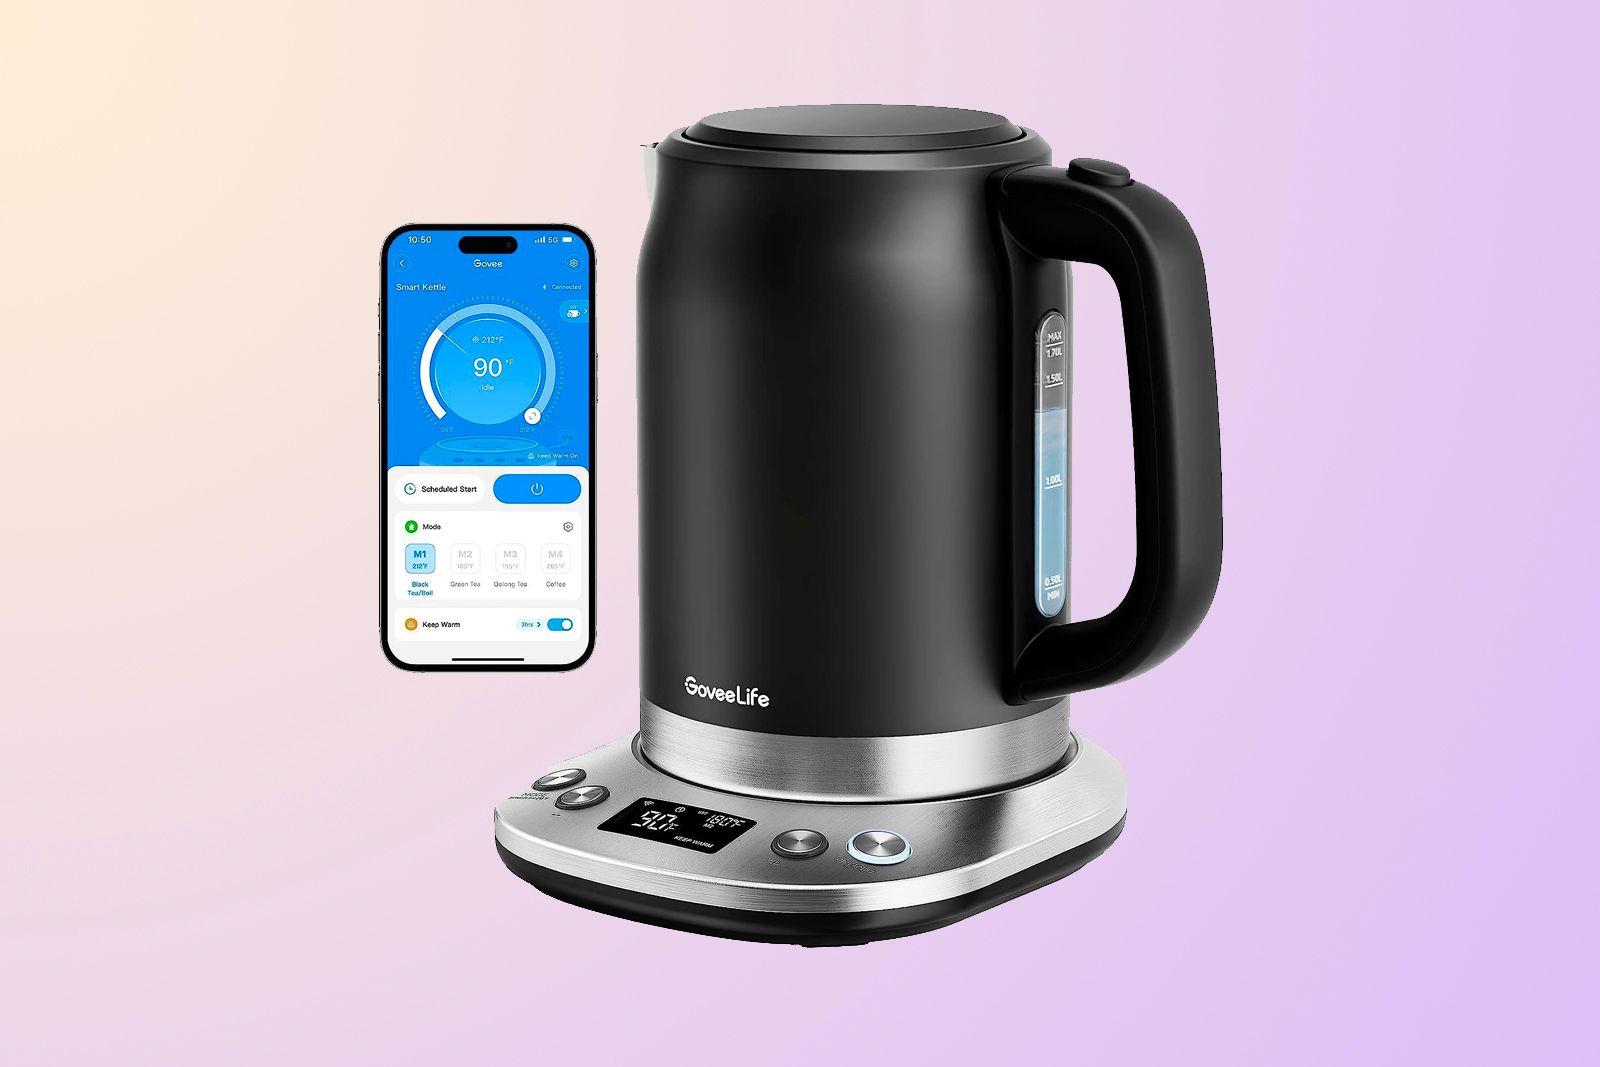 Govee Life Smart Electric Kettle